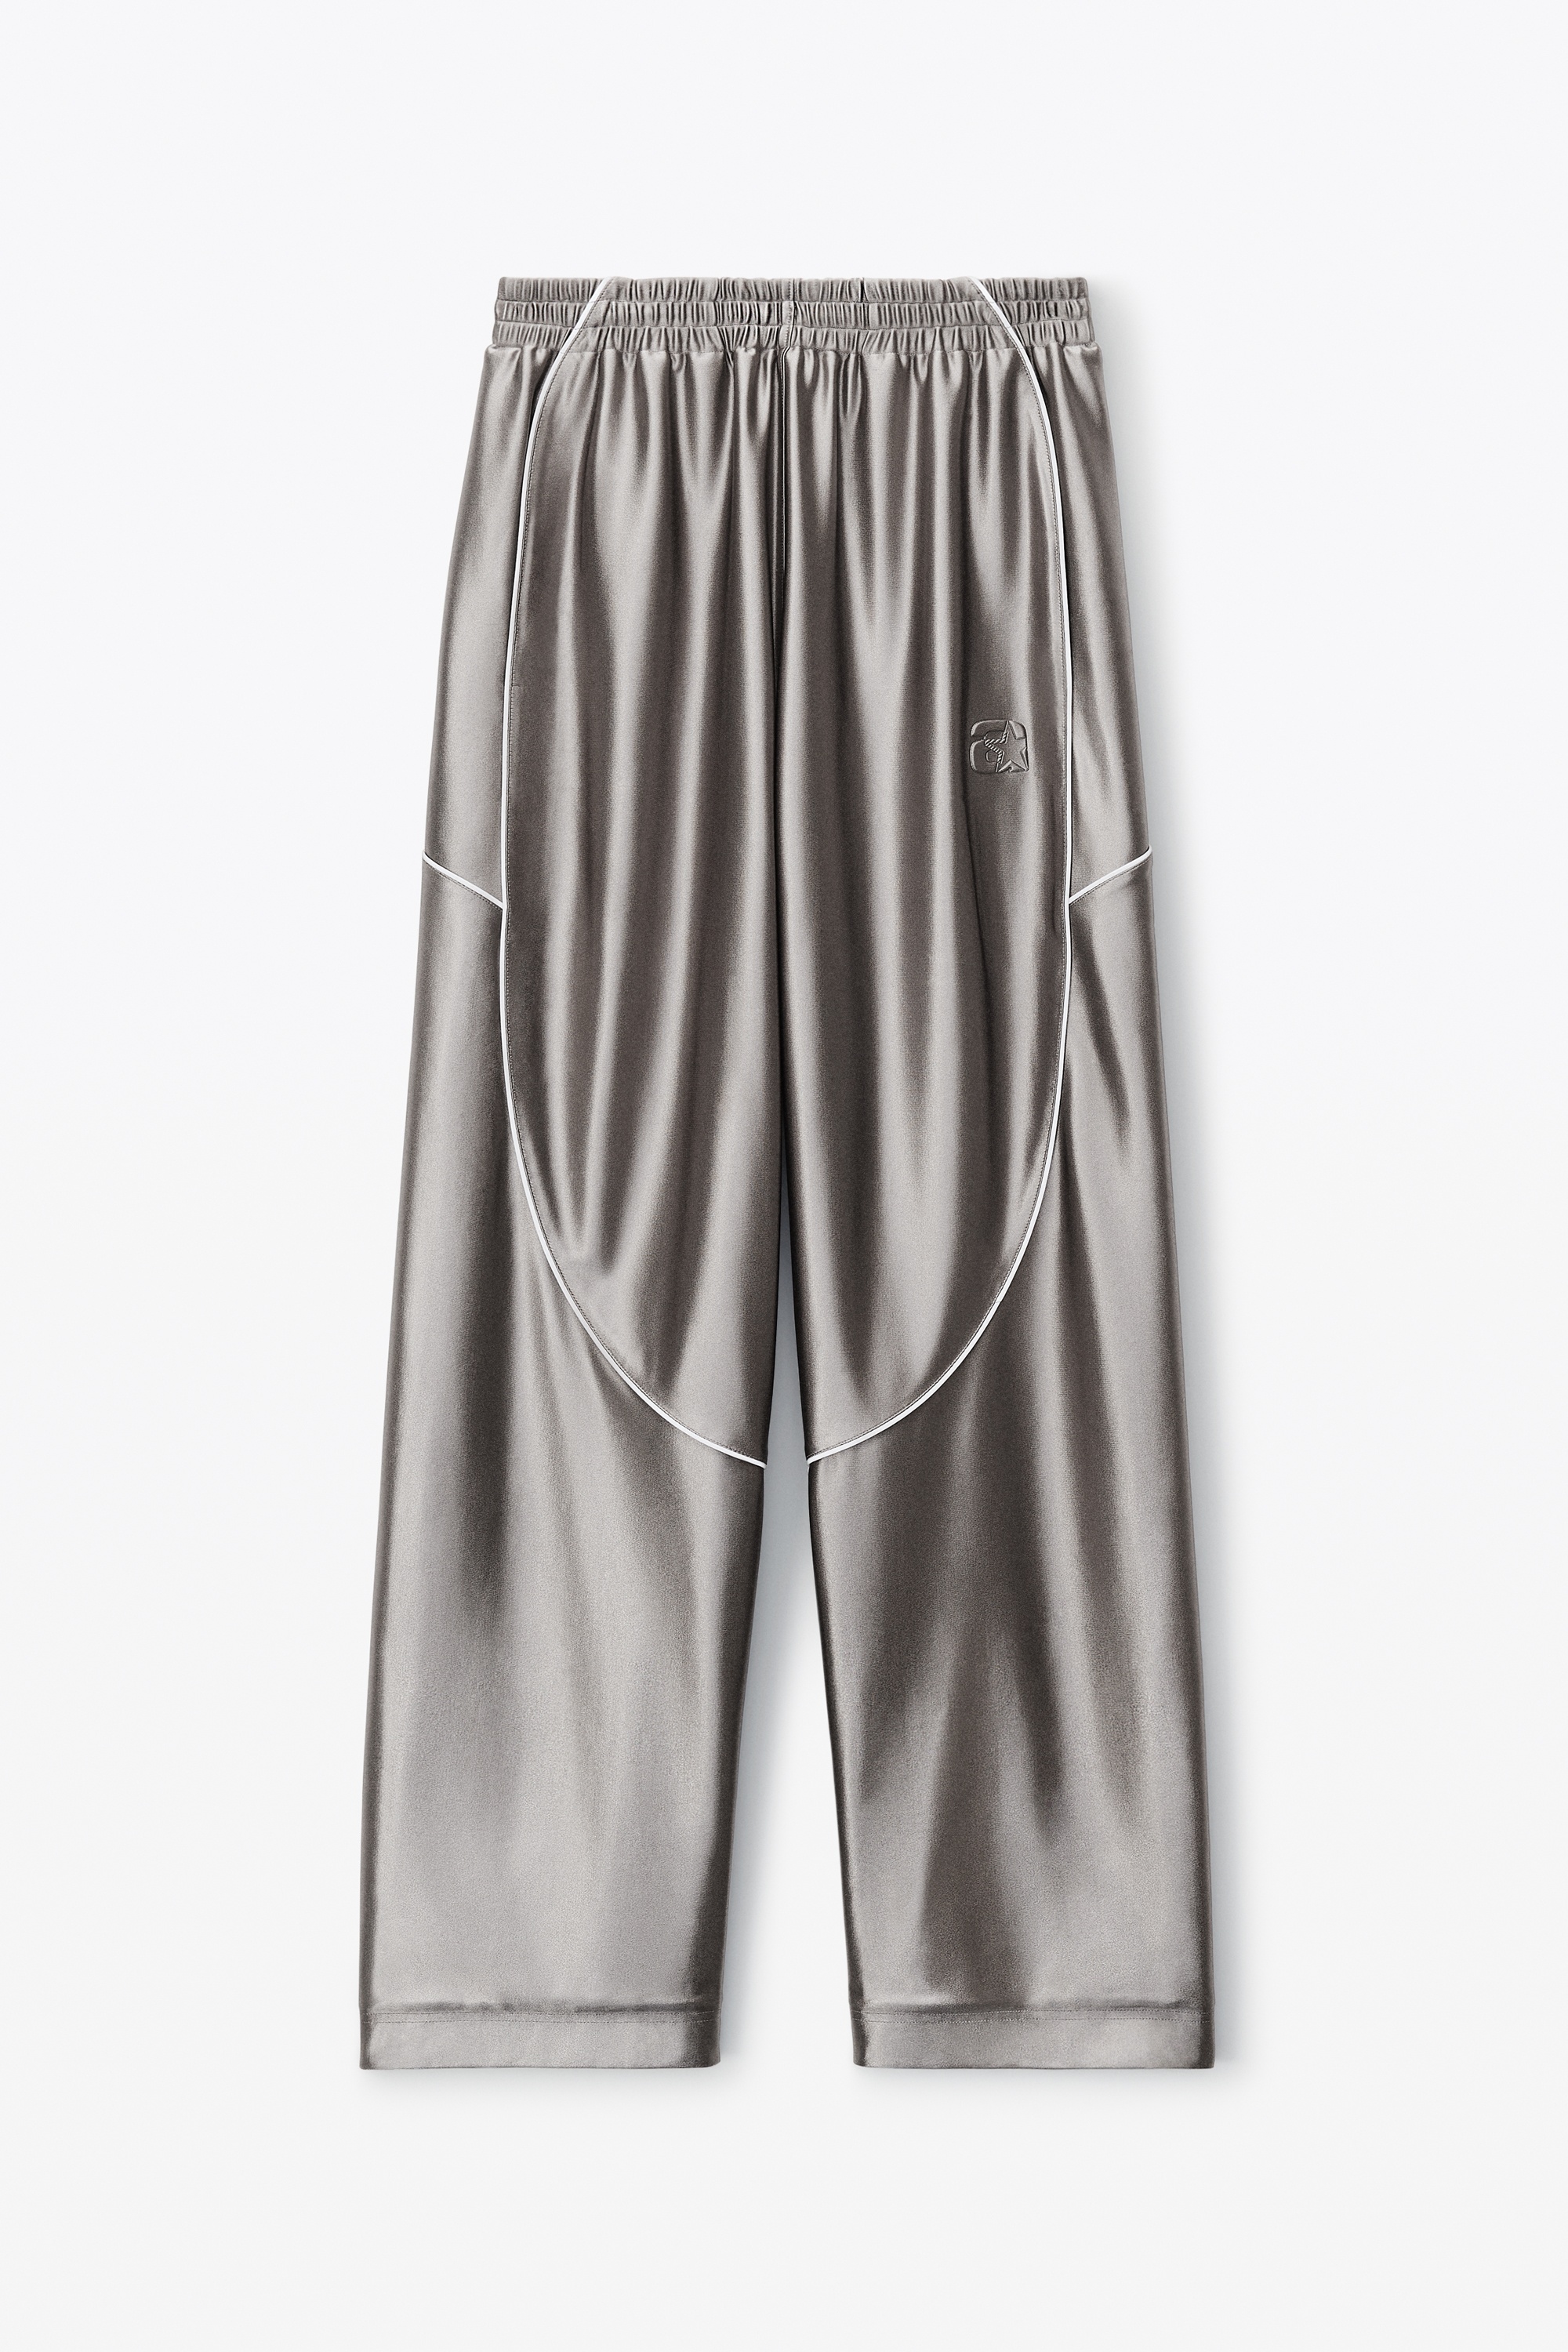 TRACK PANTS IN SATIN FAILLE JERSEY - 1